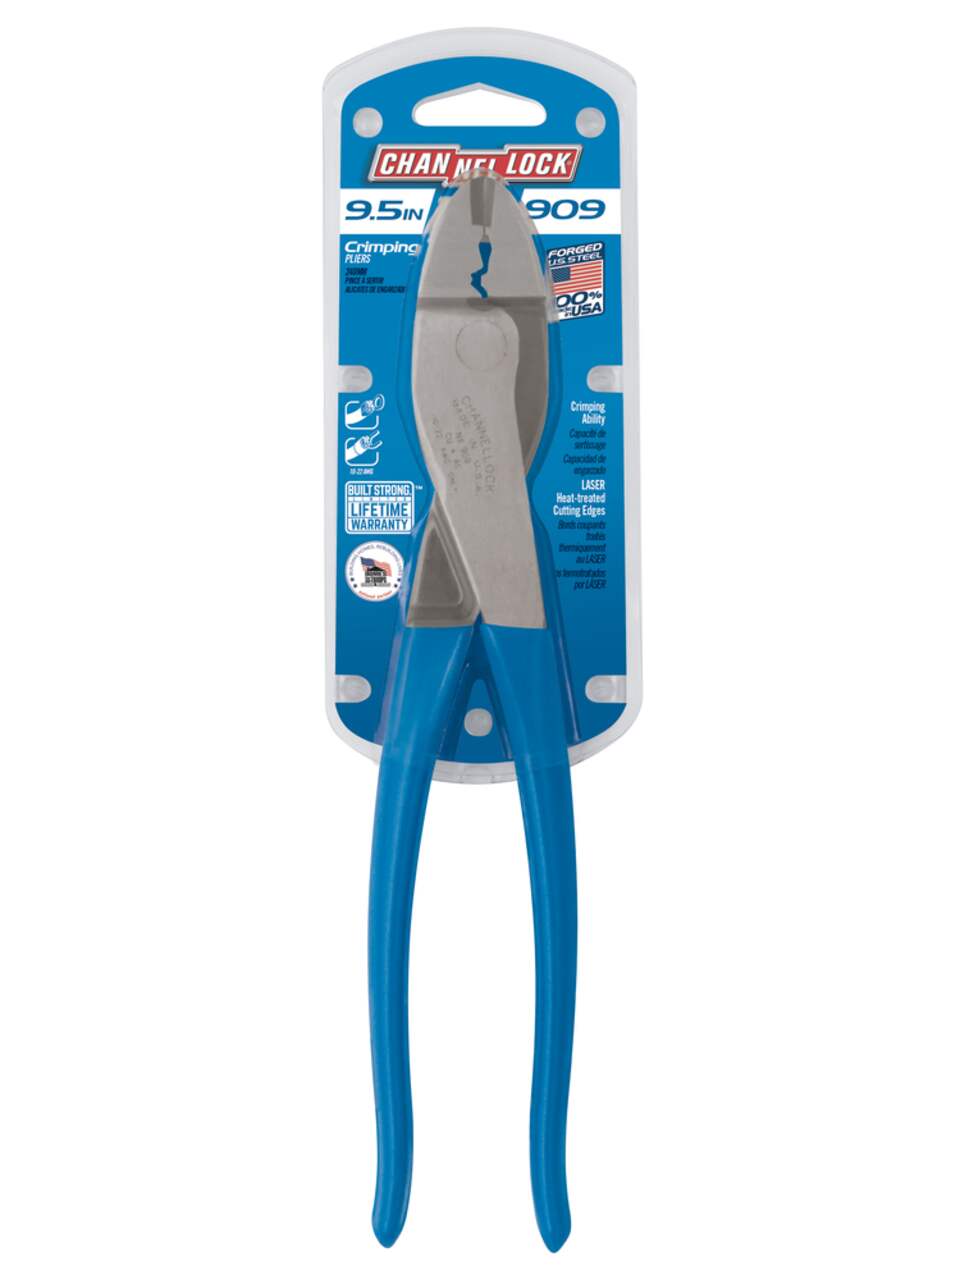 Channellock® 909 Crimping Tool Pliers with Cutter, 10-22 Gauge